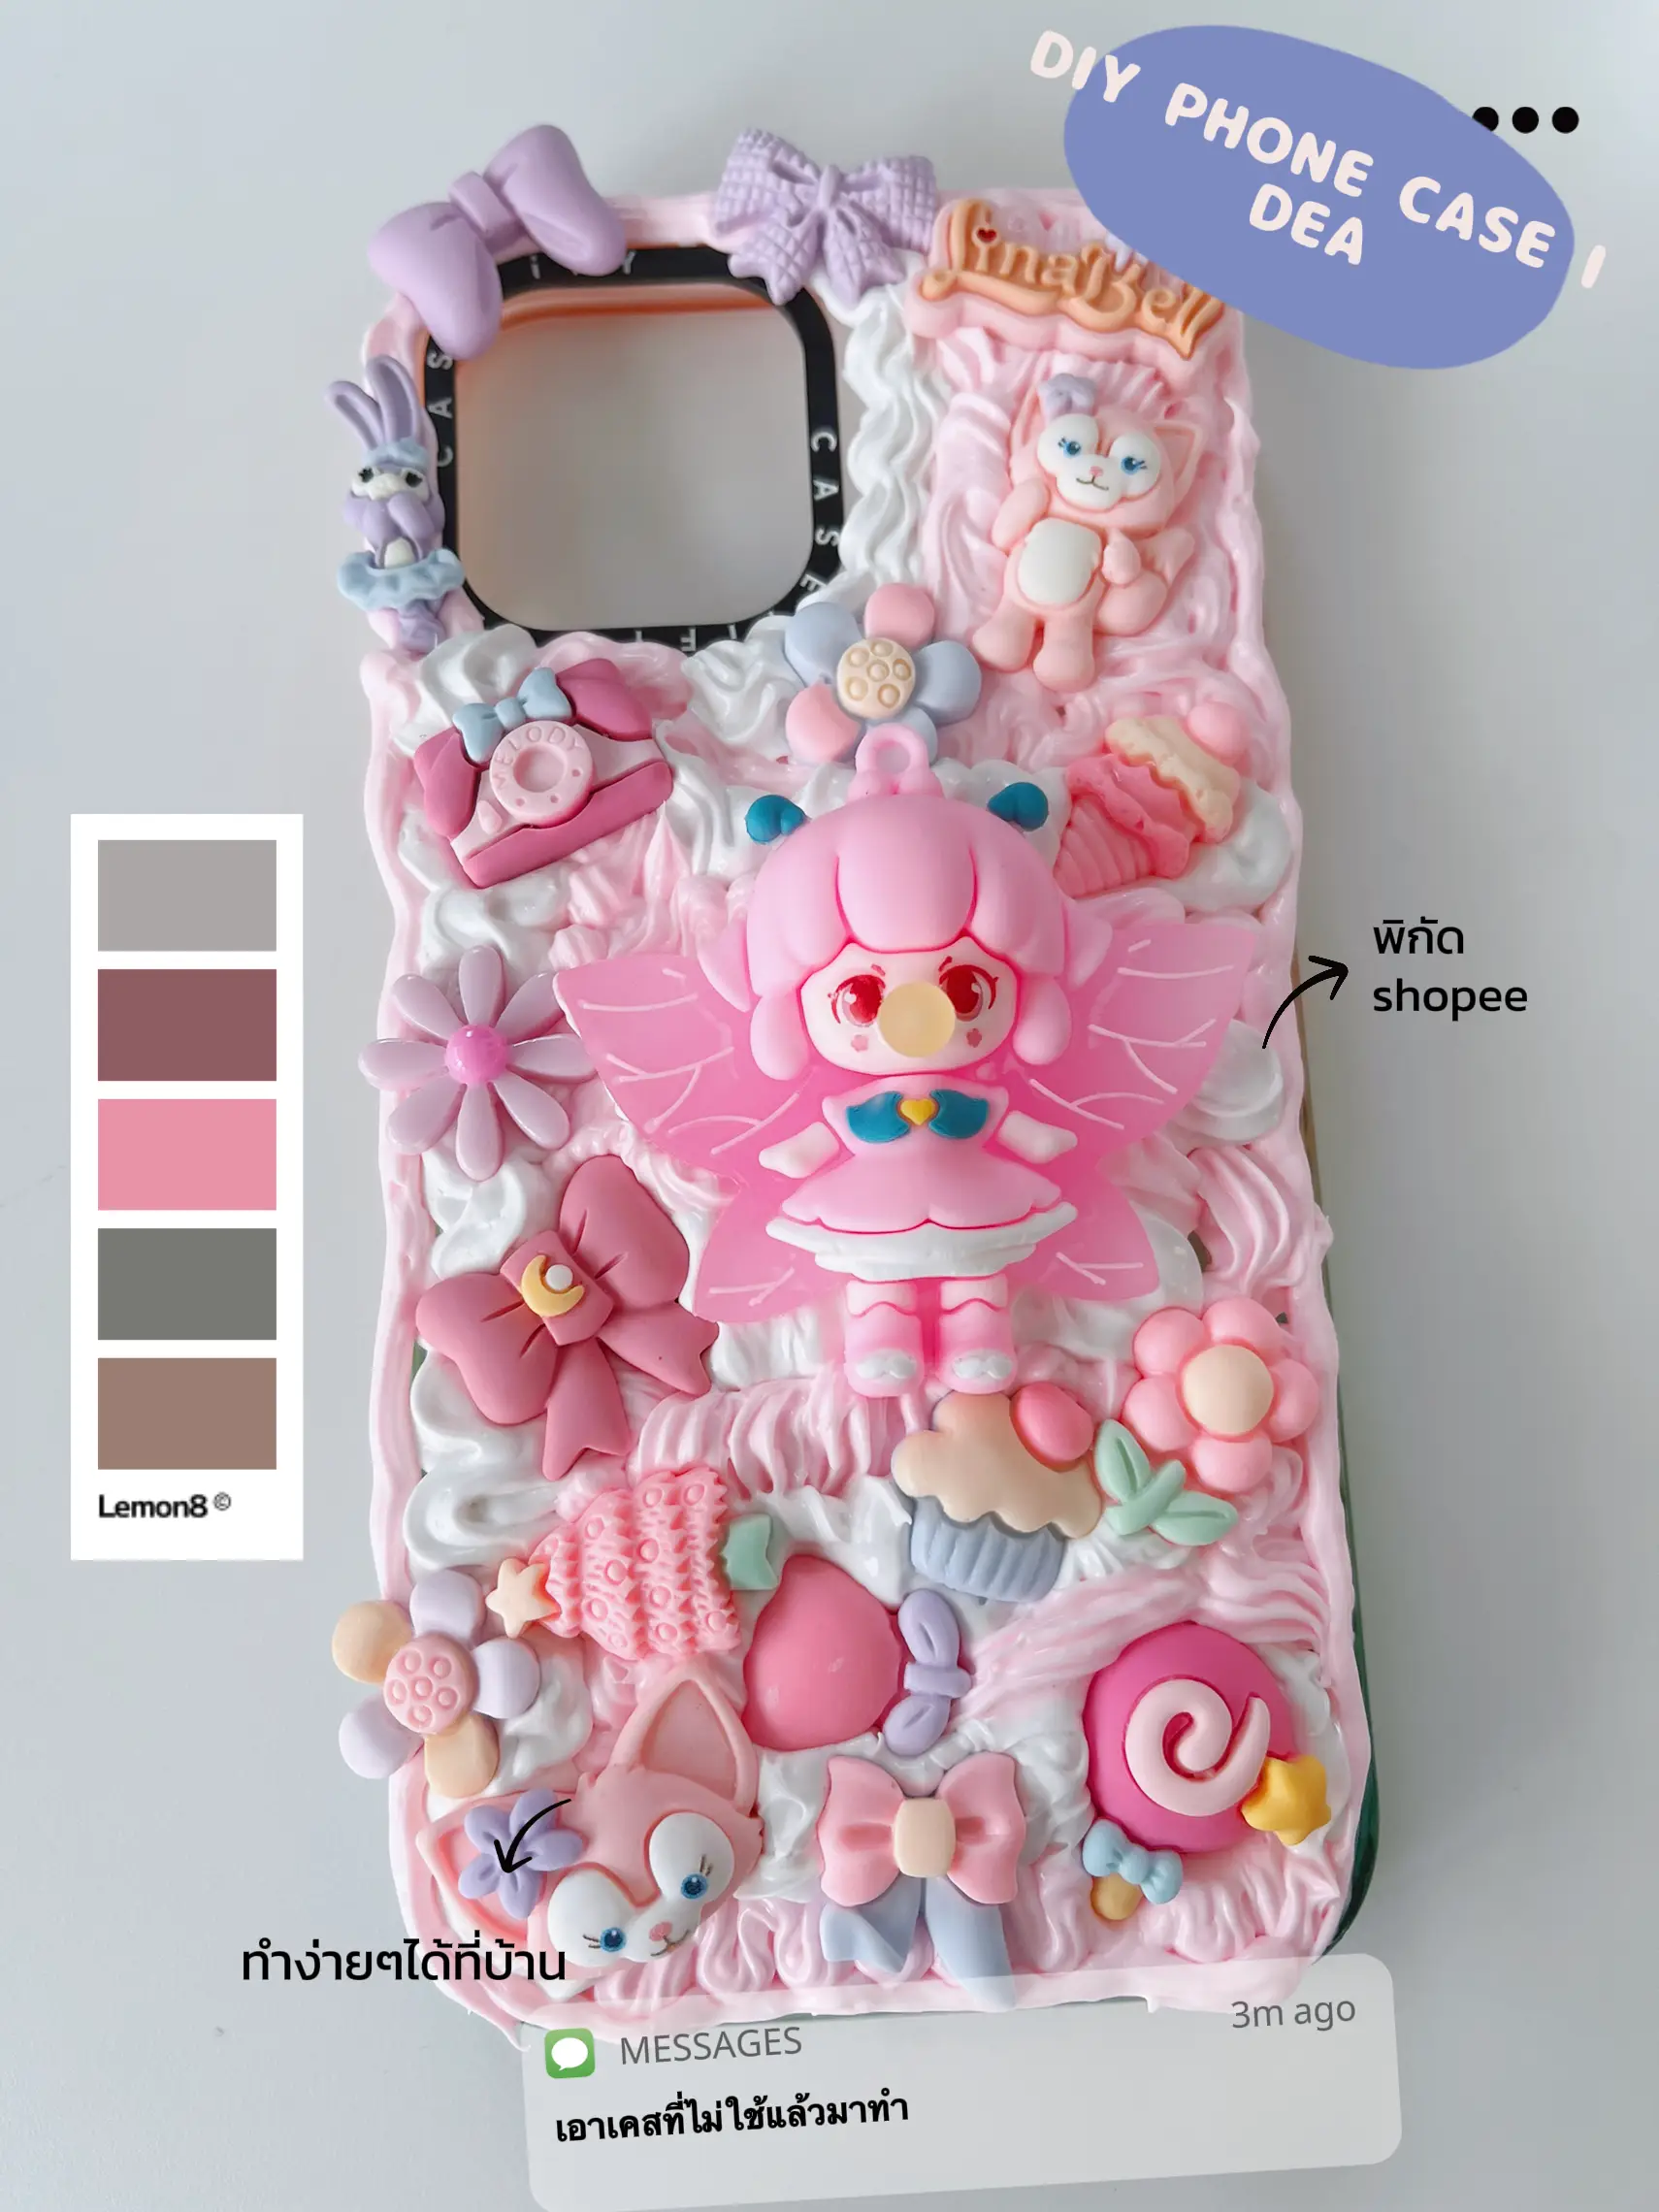 Charms for Decoden Cases: Where to Source